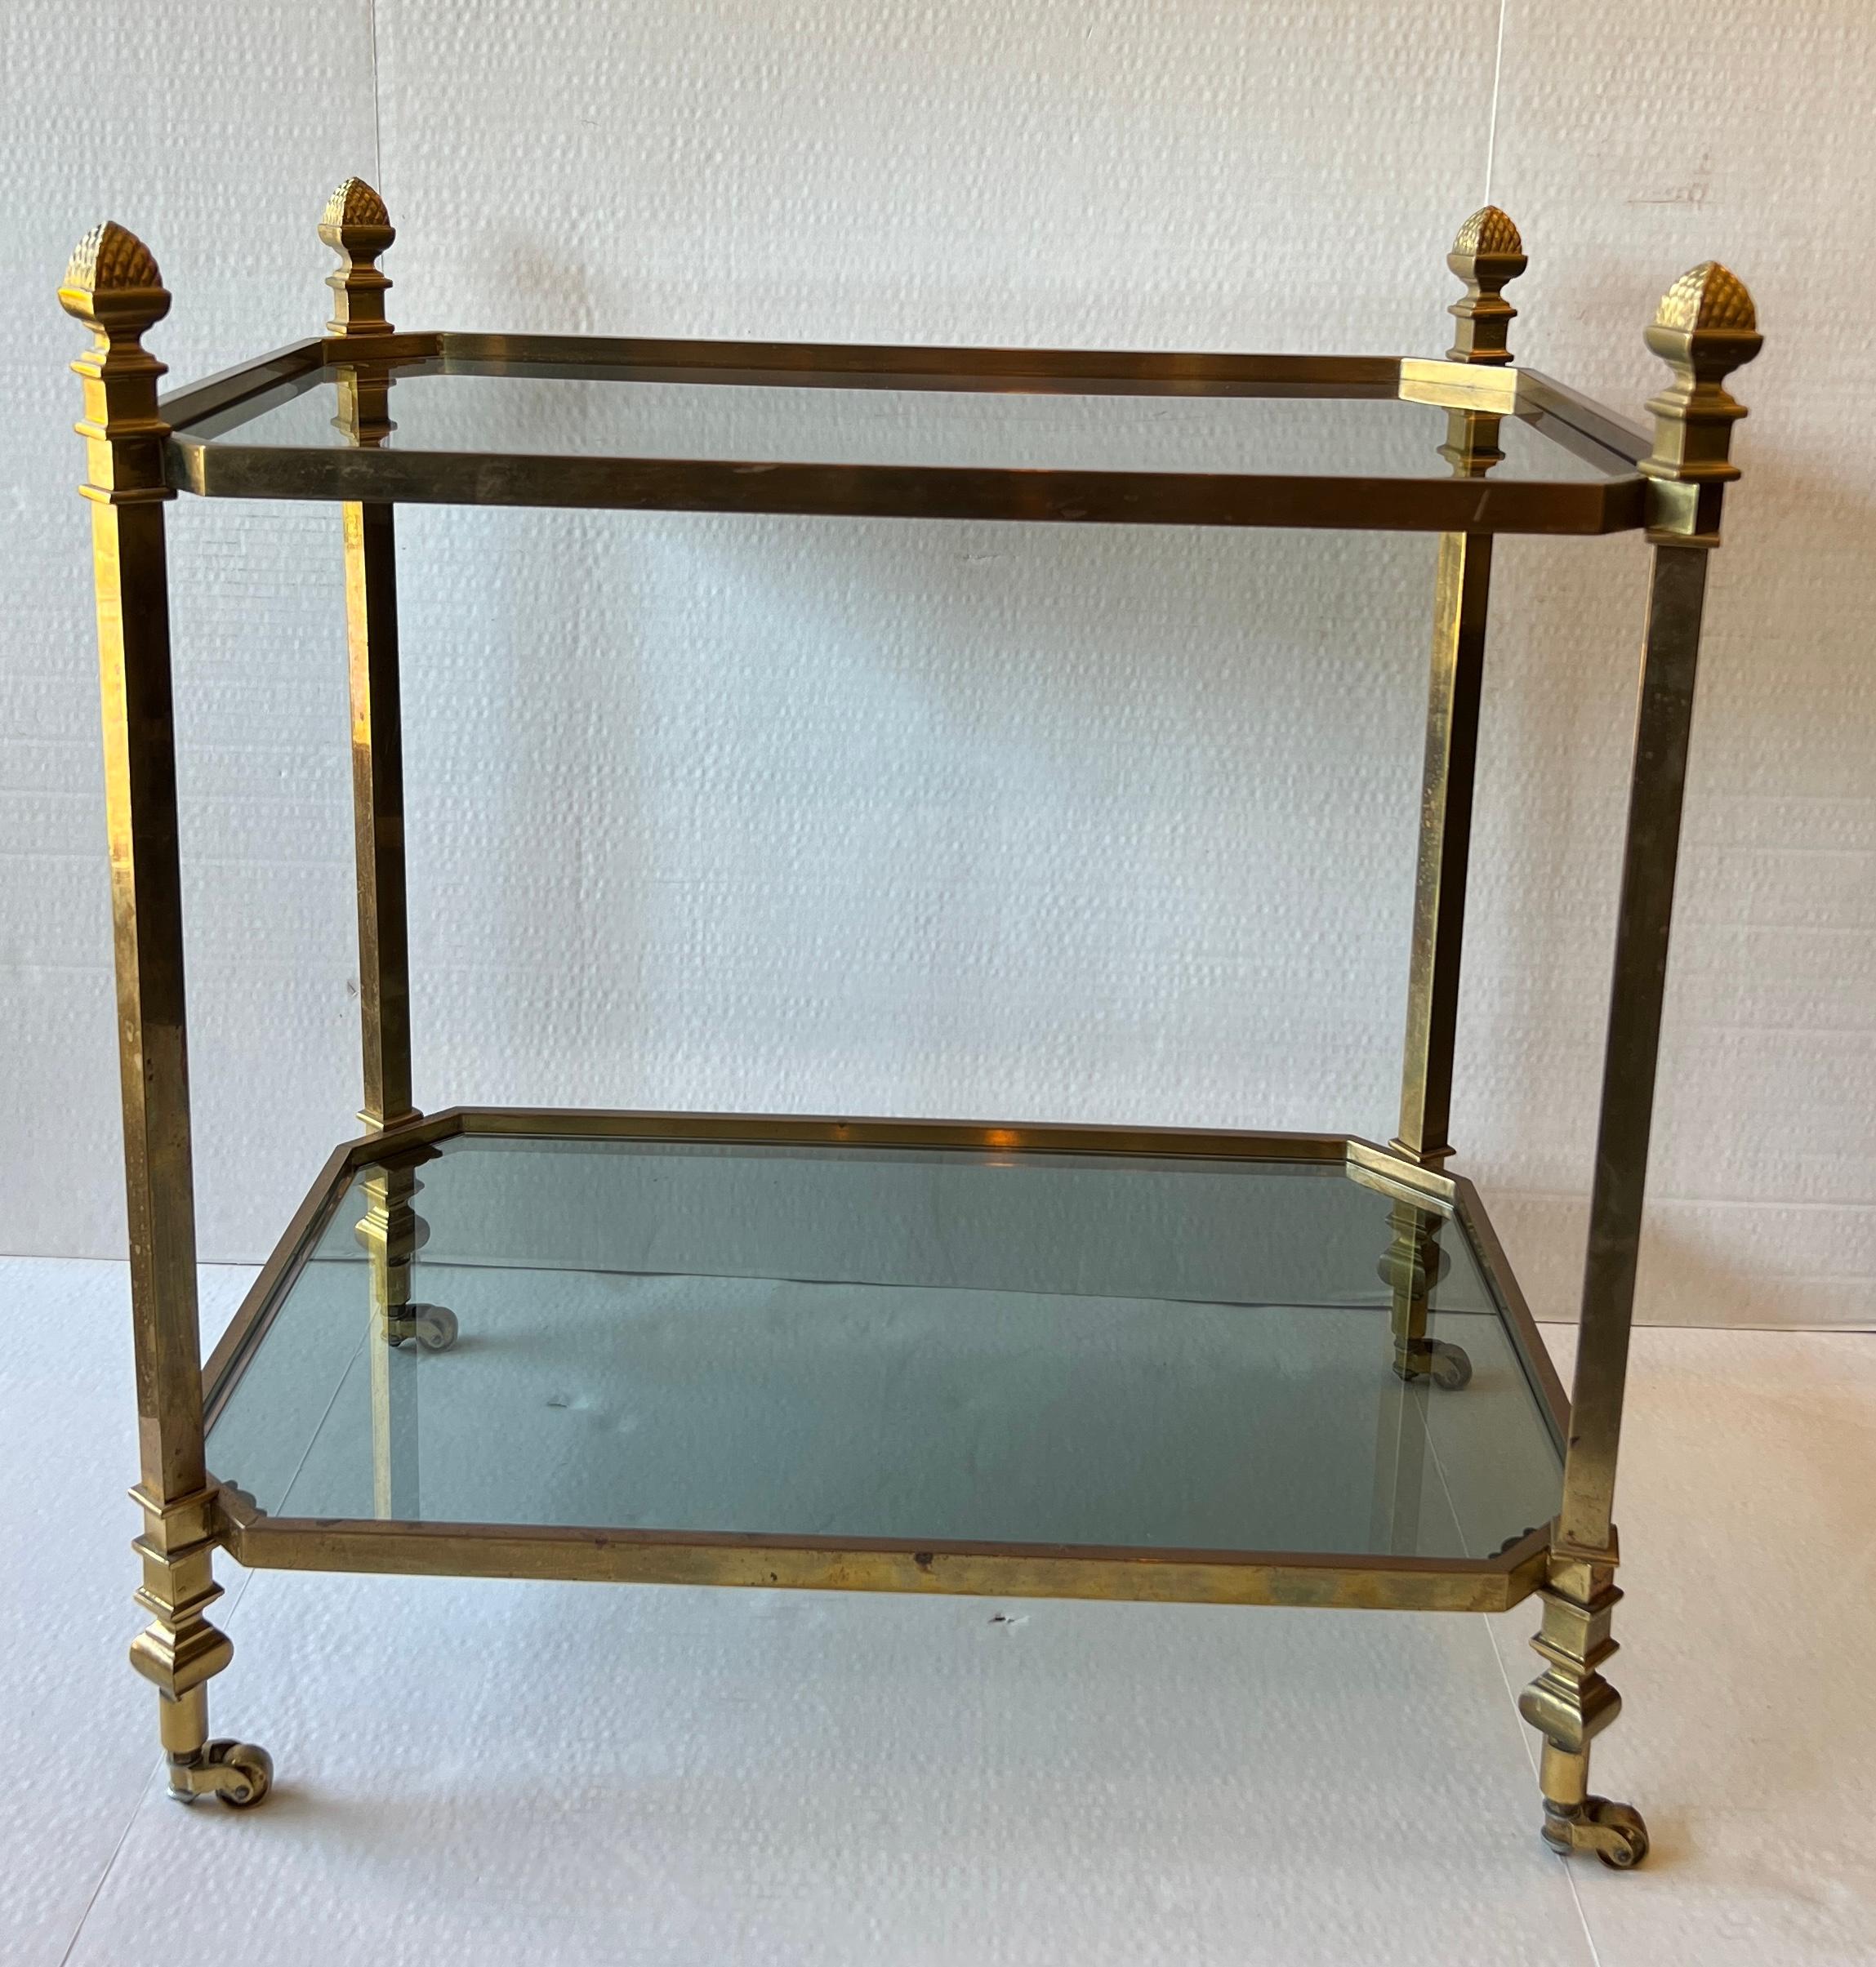 Beautiful gold tone brass table with four large pinecone finials on casters. Two shelves of grey toned glass

